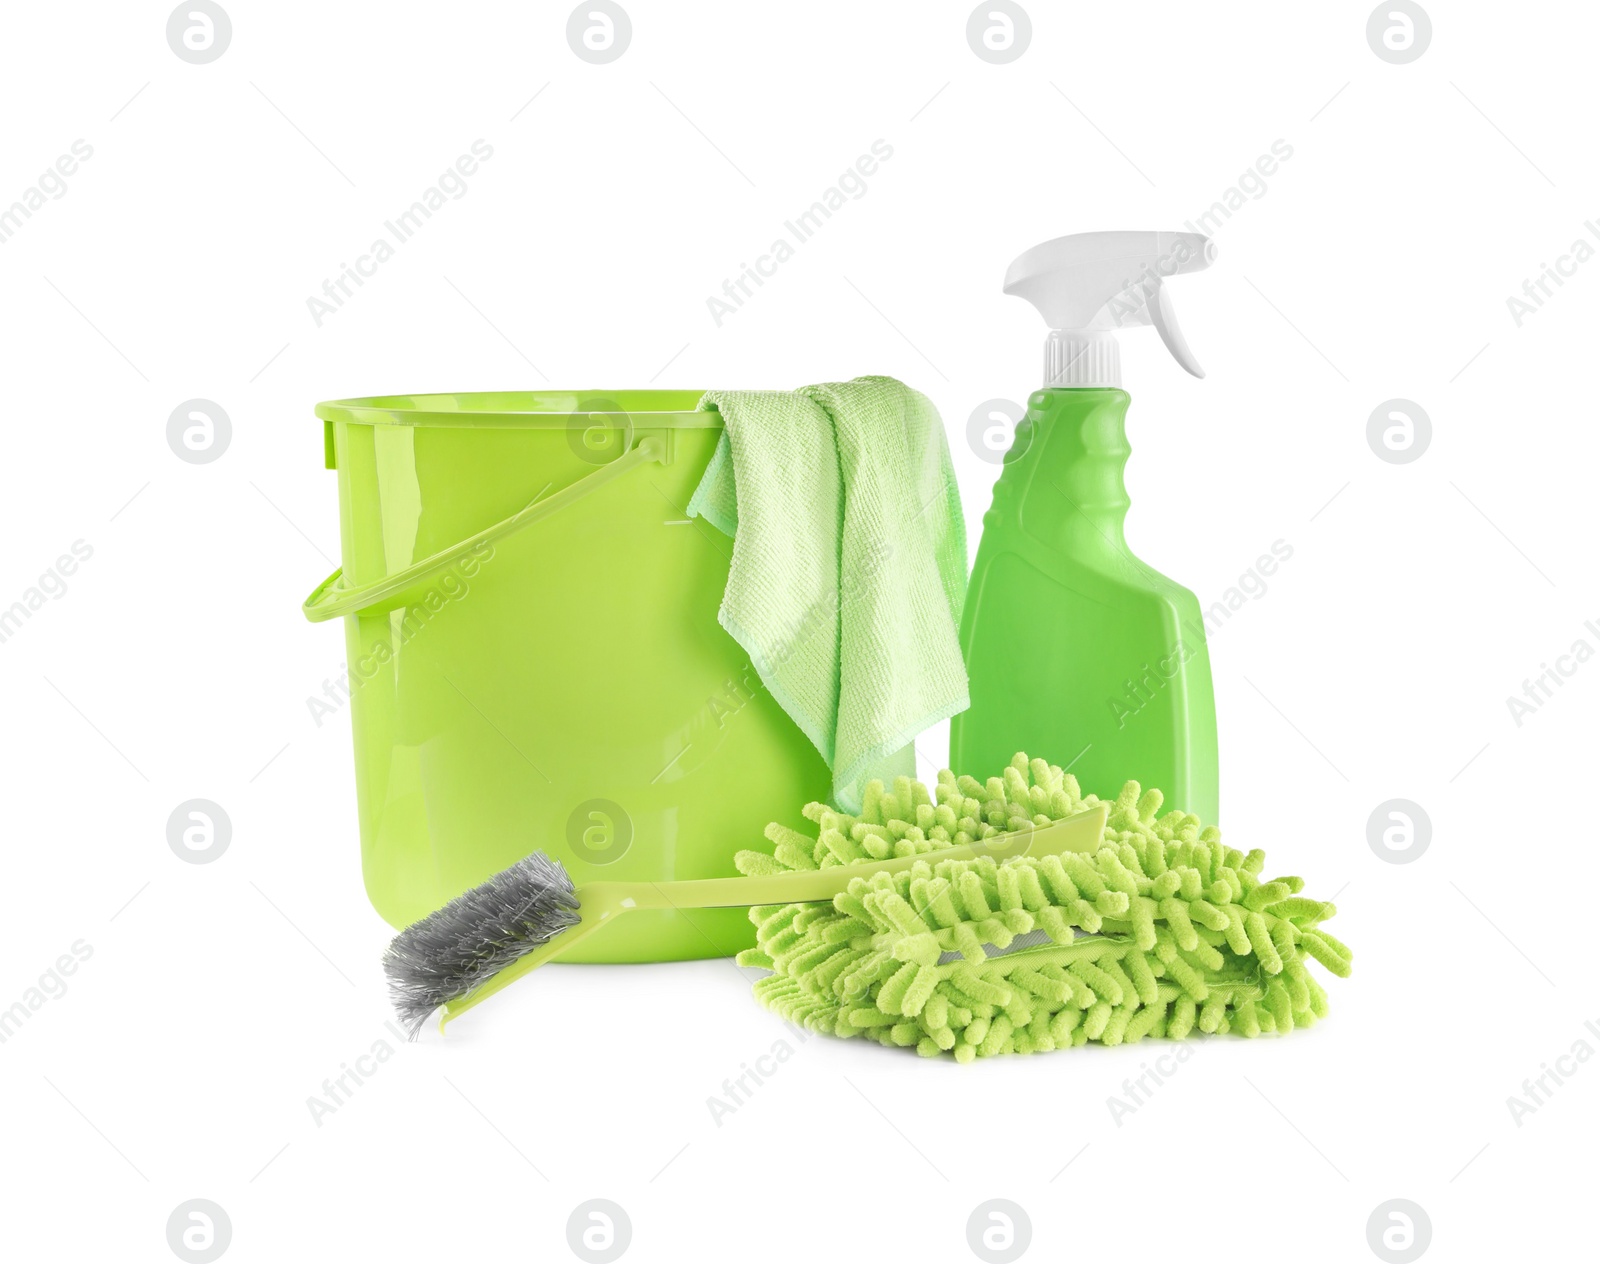 Photo of Plastic bucket with different cleaning supplies isolated on white